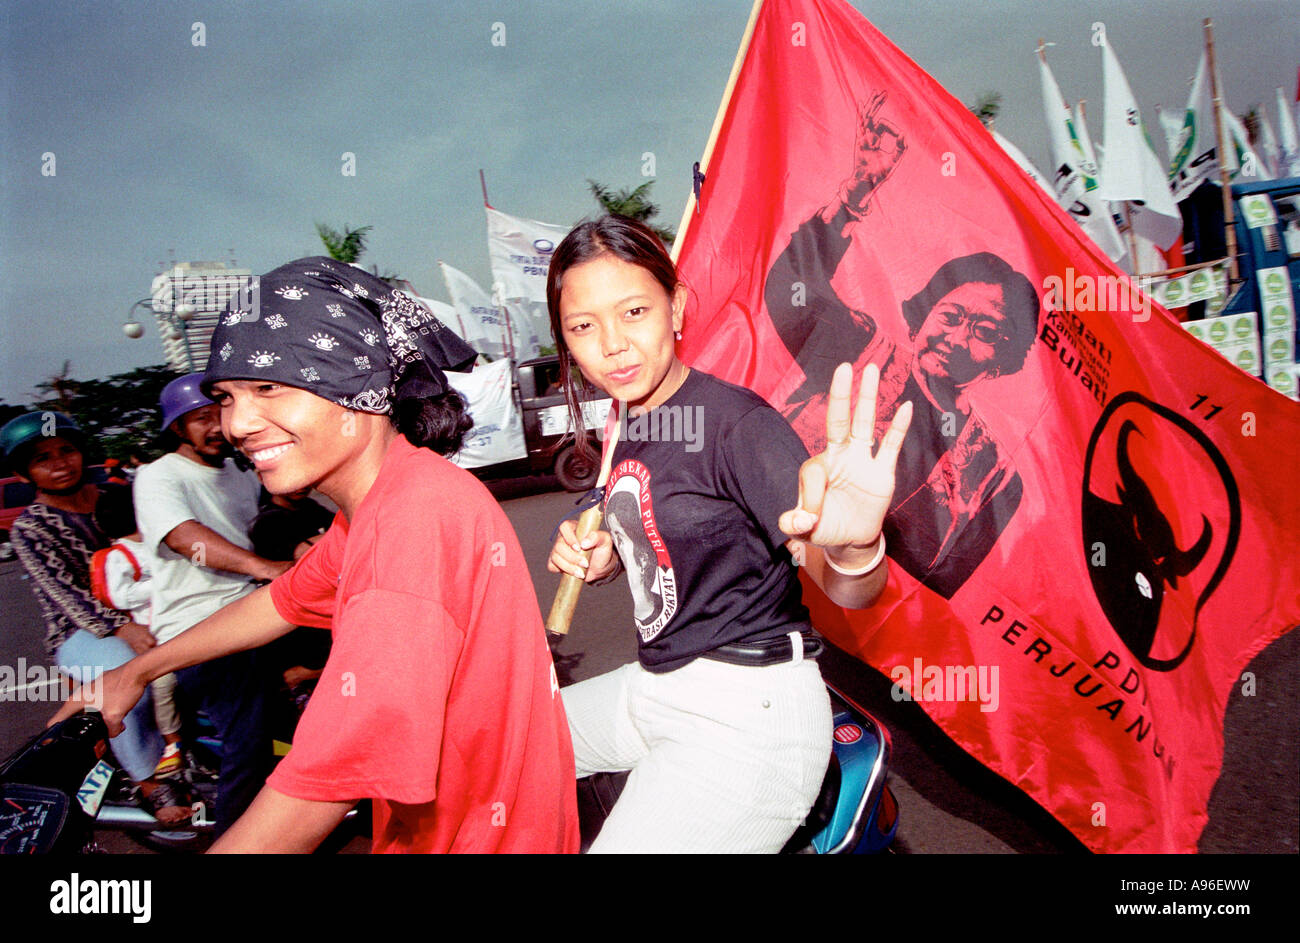 Jakarta youth ride around Jakarta showing their support for the P D I political party Stock Photo